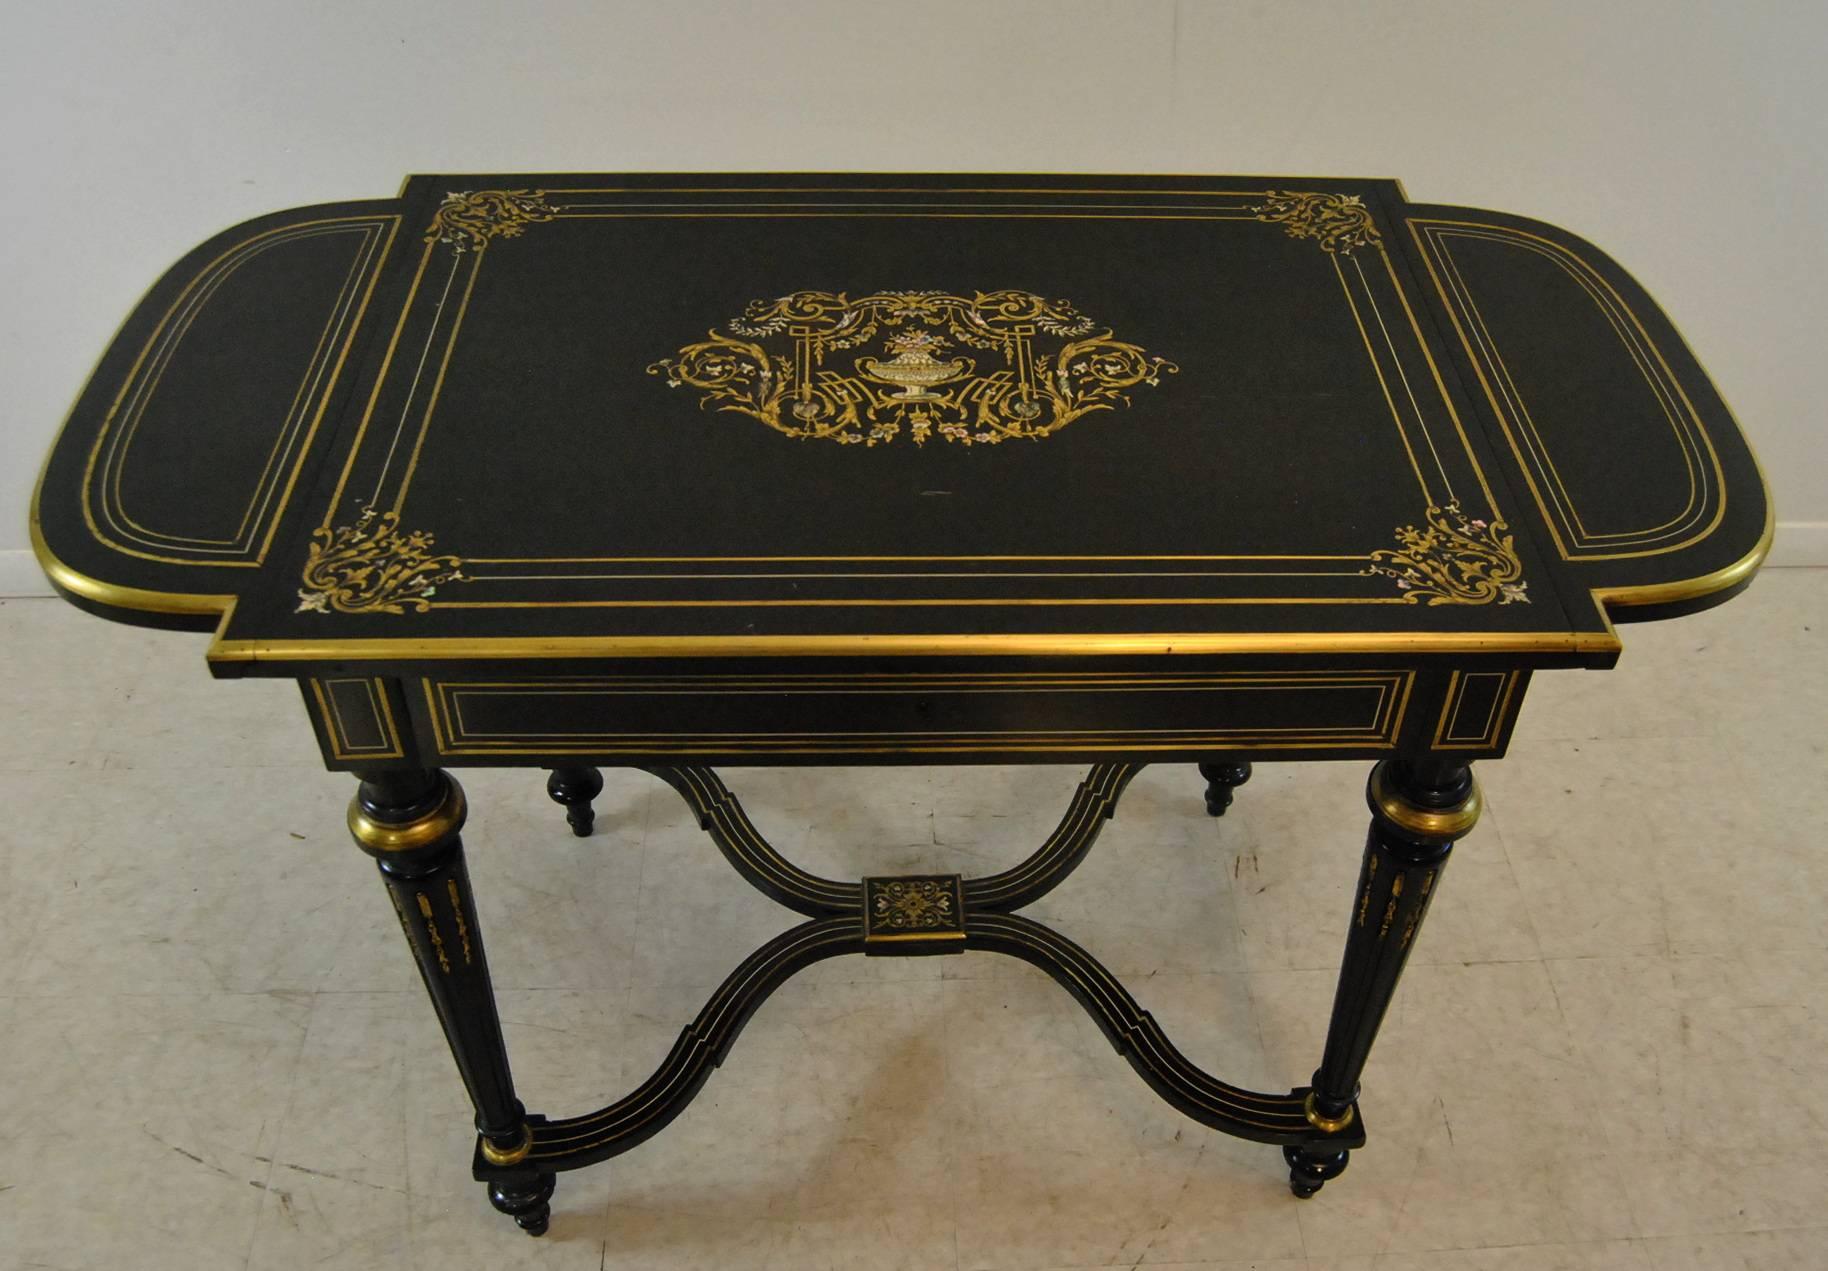 Wood 19th Century Ebonized Drop Leaf Table with Inlaid Mother-of-Pearl and Brass For Sale